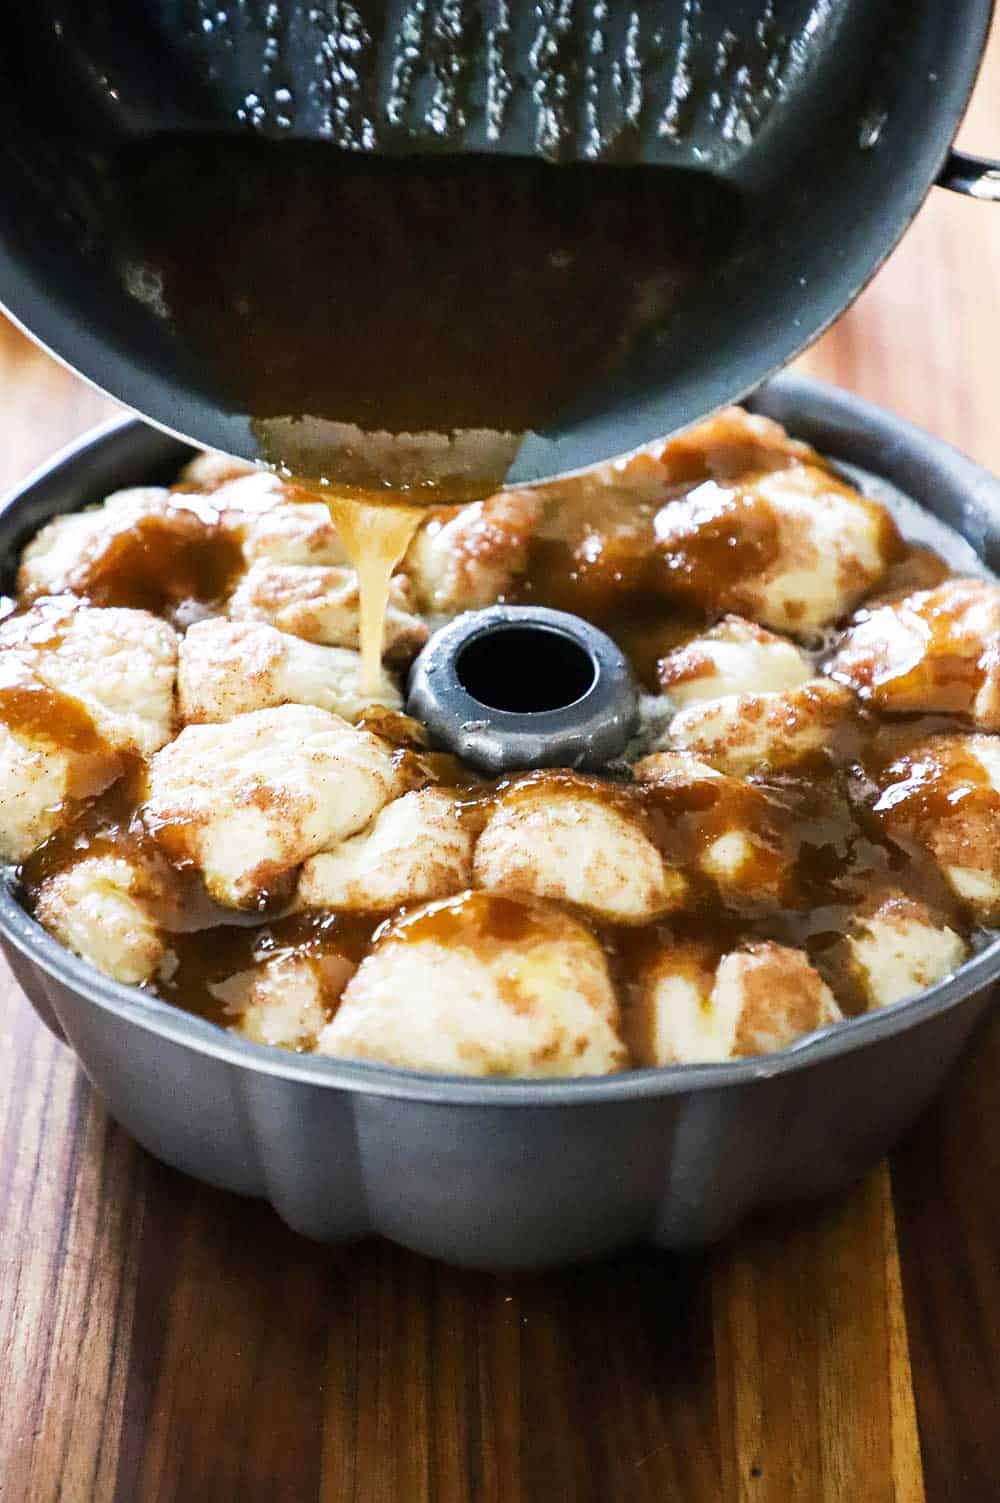 Caramel sauce being poured from a saucepan onto a bundt pan filled with risen balls of bread dough.